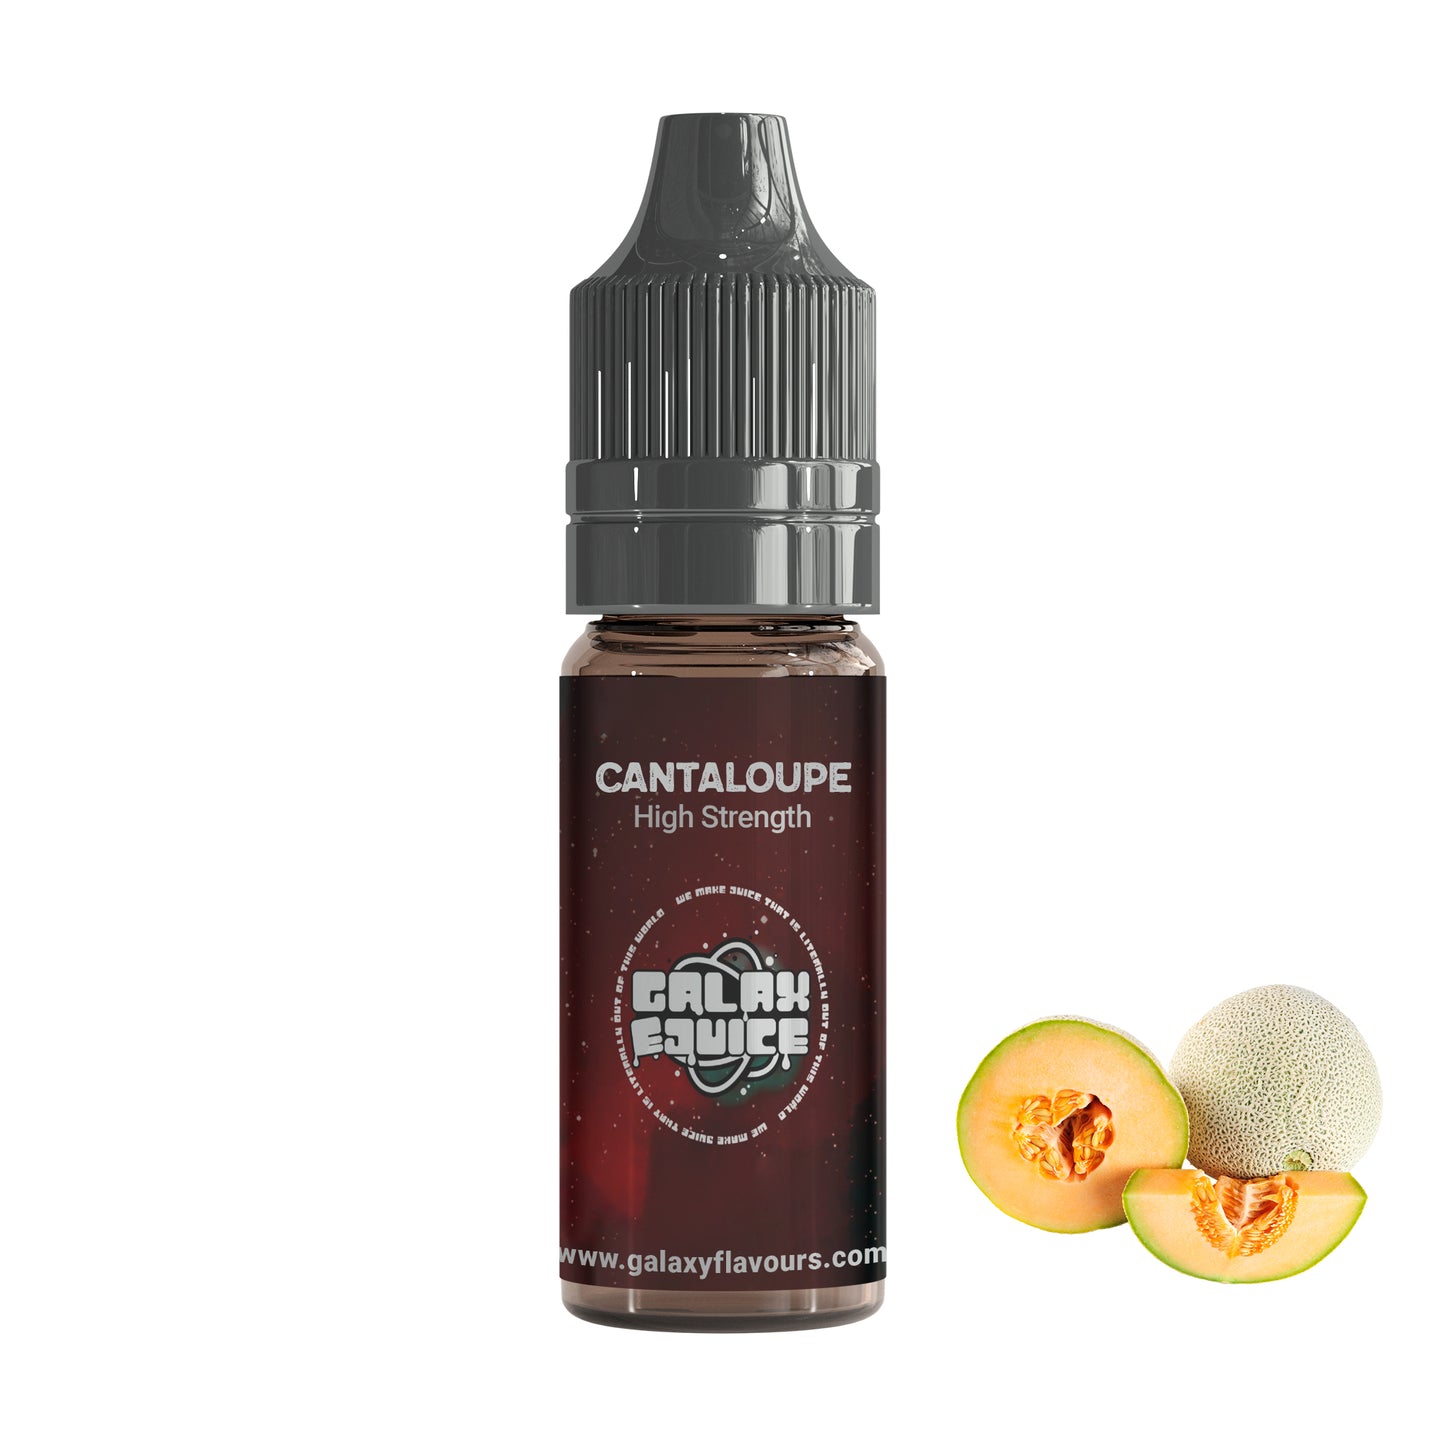 Cantaloupe High Strength Professional Flavouring.